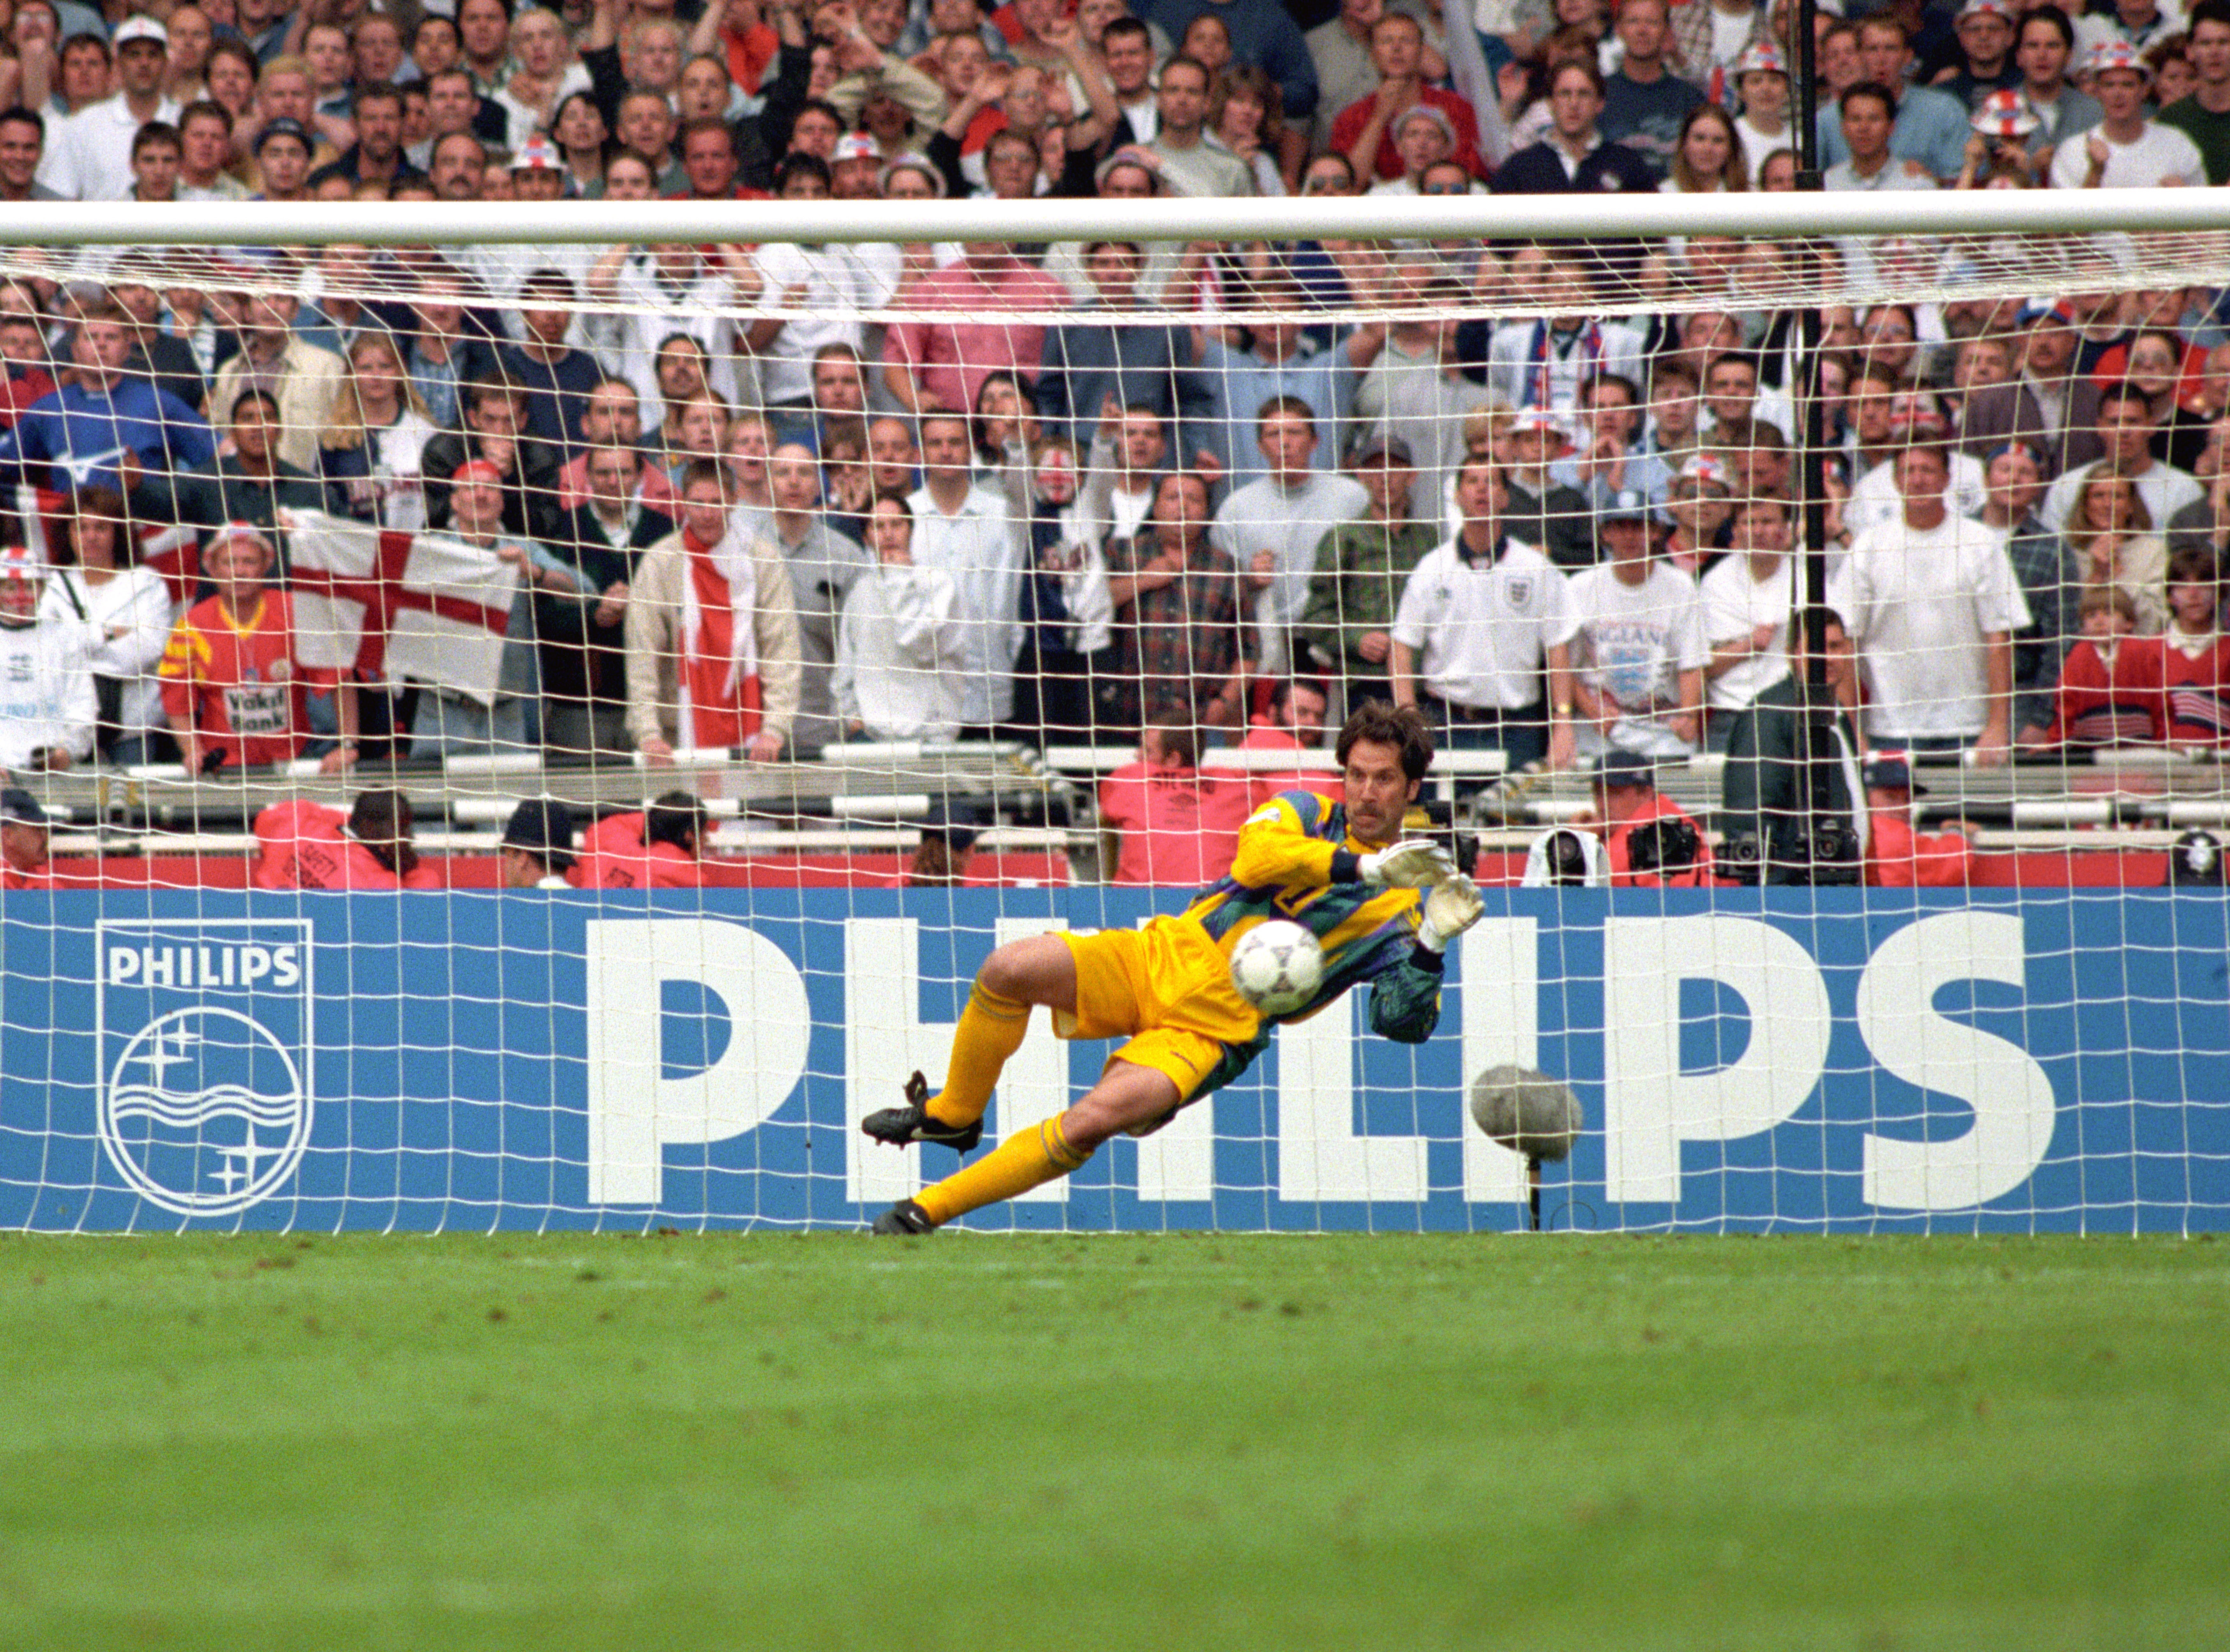 England won on penalties against Spain to reach the semi-finals of Euro 96 (Adam Butler/PA)